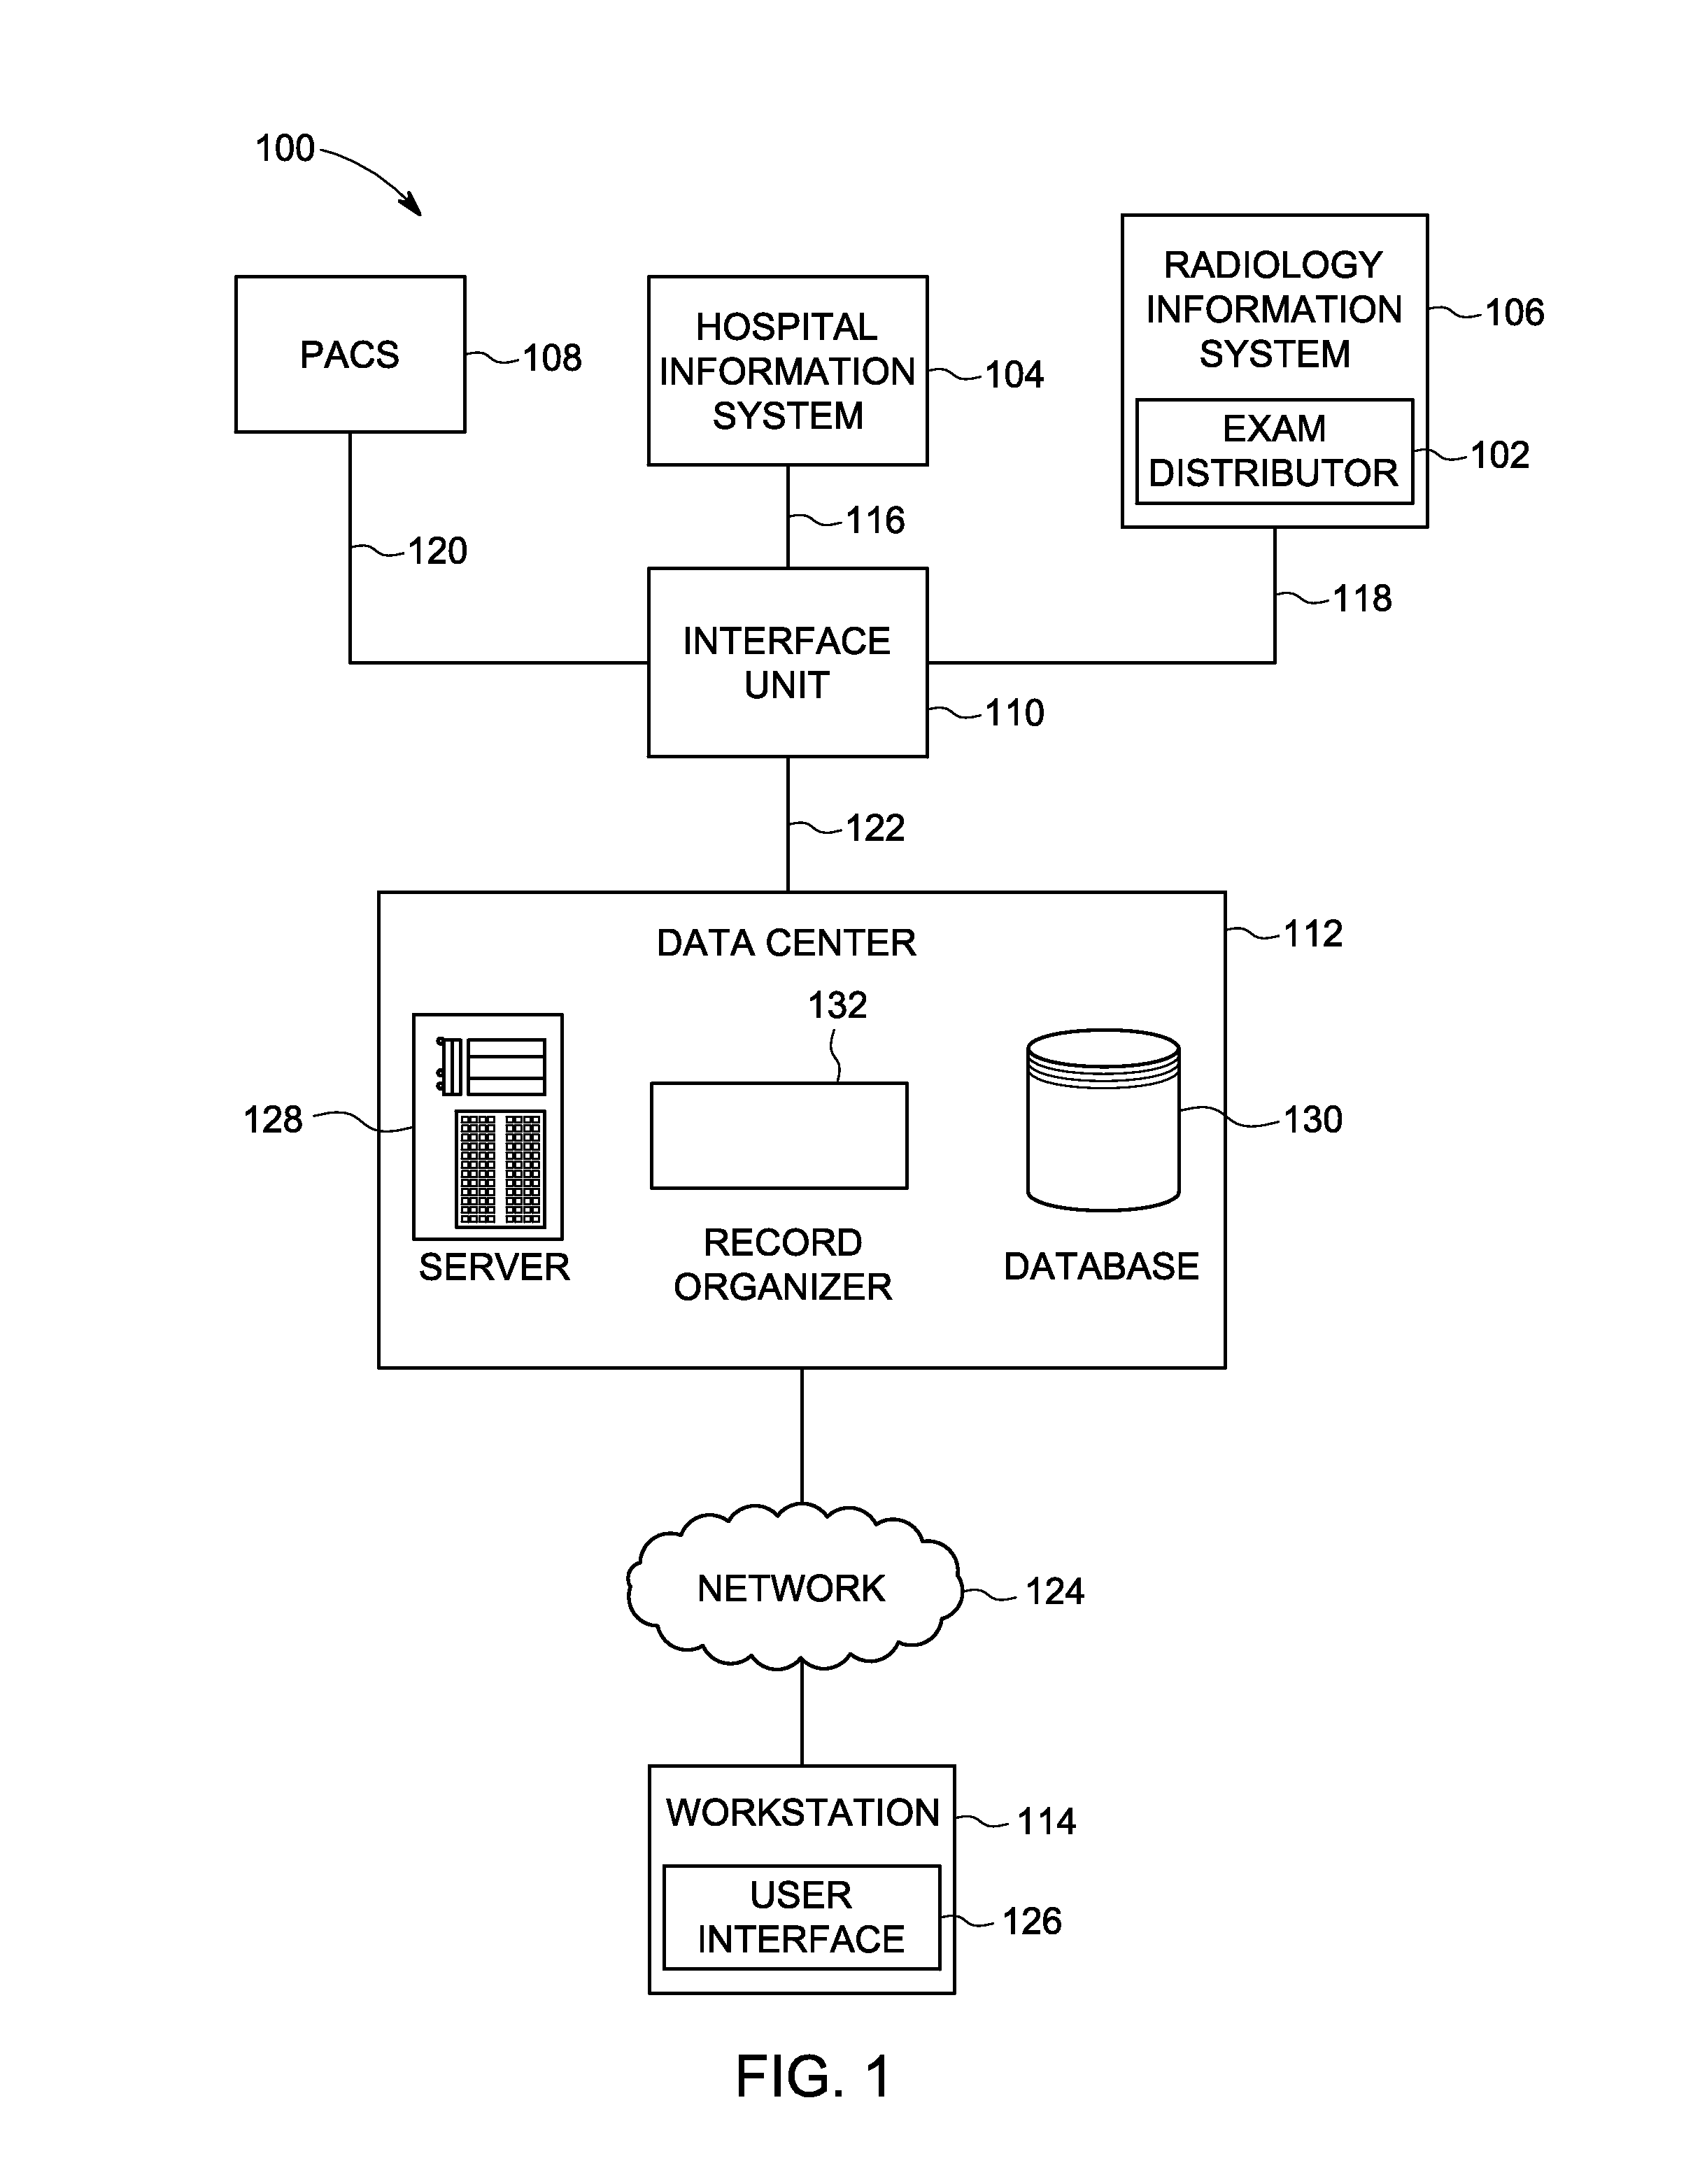 Systems and methods for intelligent radiology work allocation